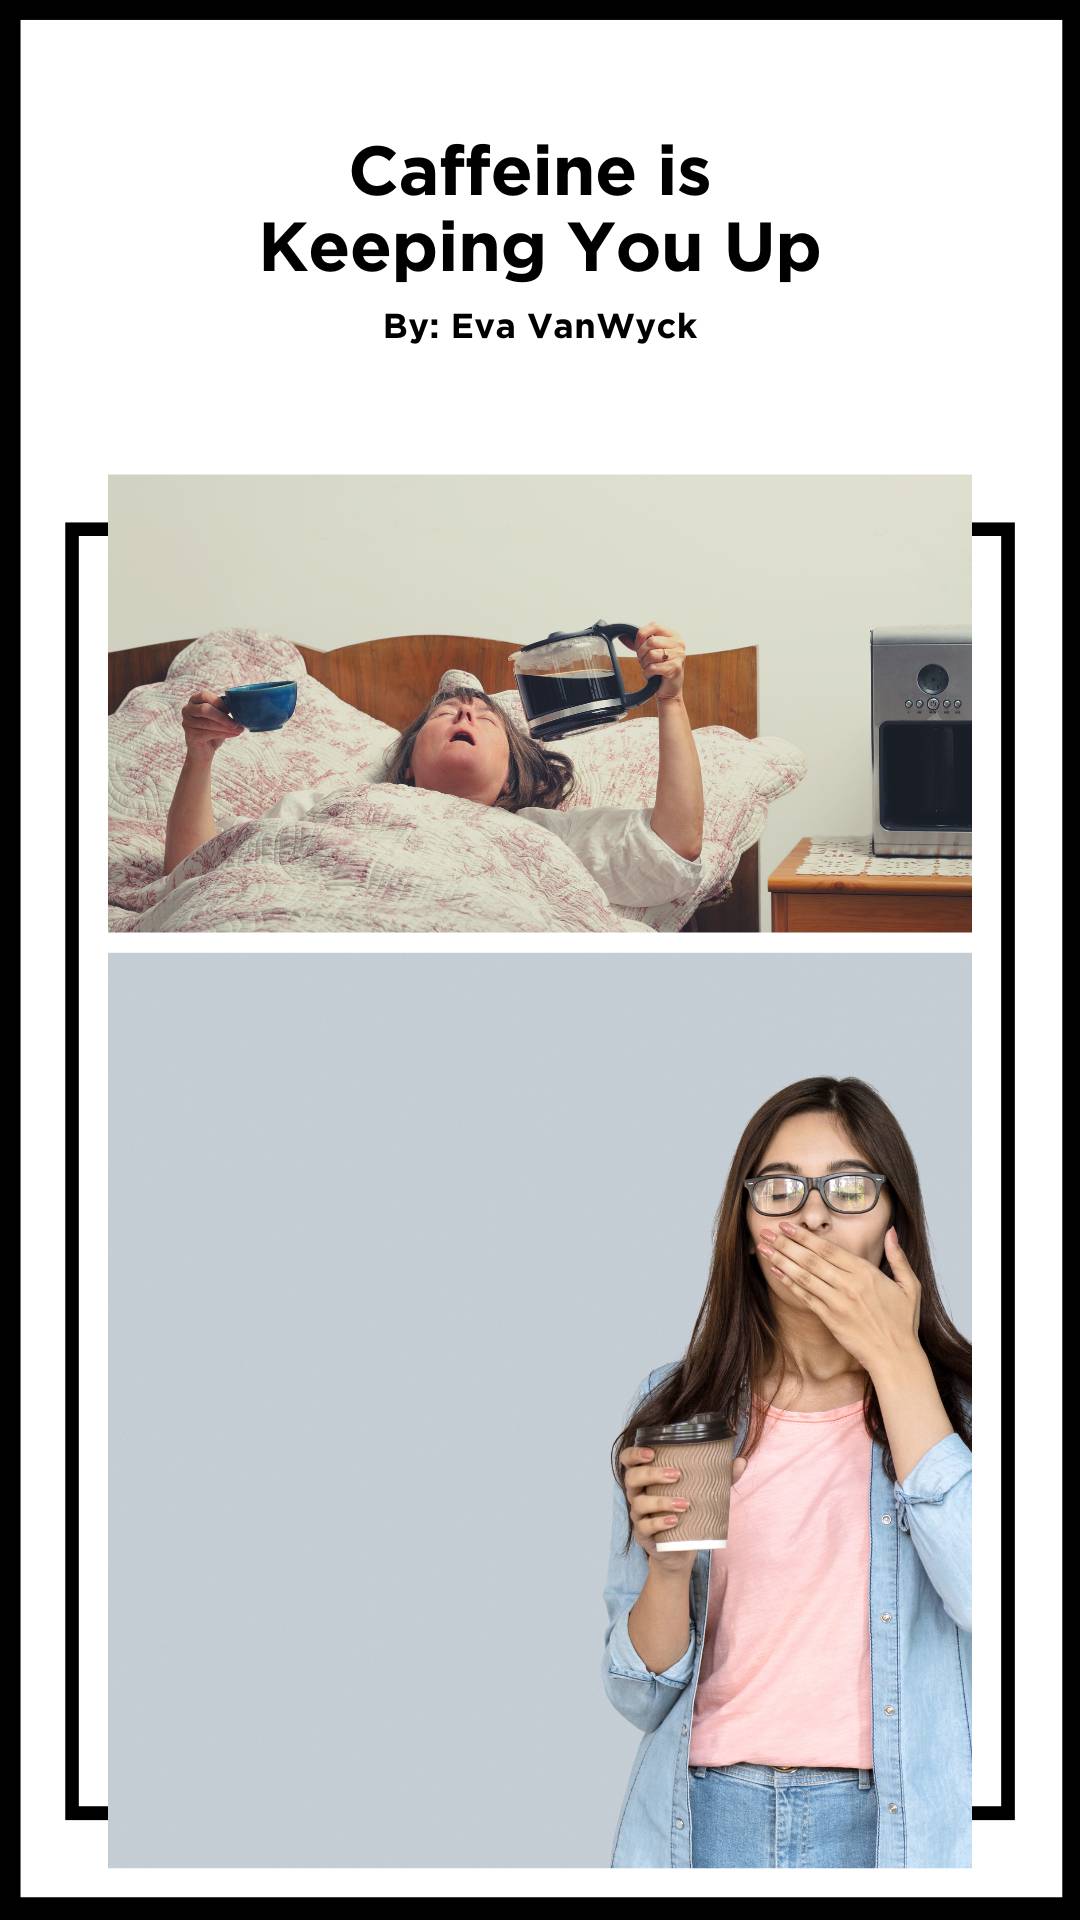 Image of person in bed pouring coffee and a person with standing yawning, holding a cup of coffee. Image says Caffeine is Keeping You Up, By: Eva VanWyck